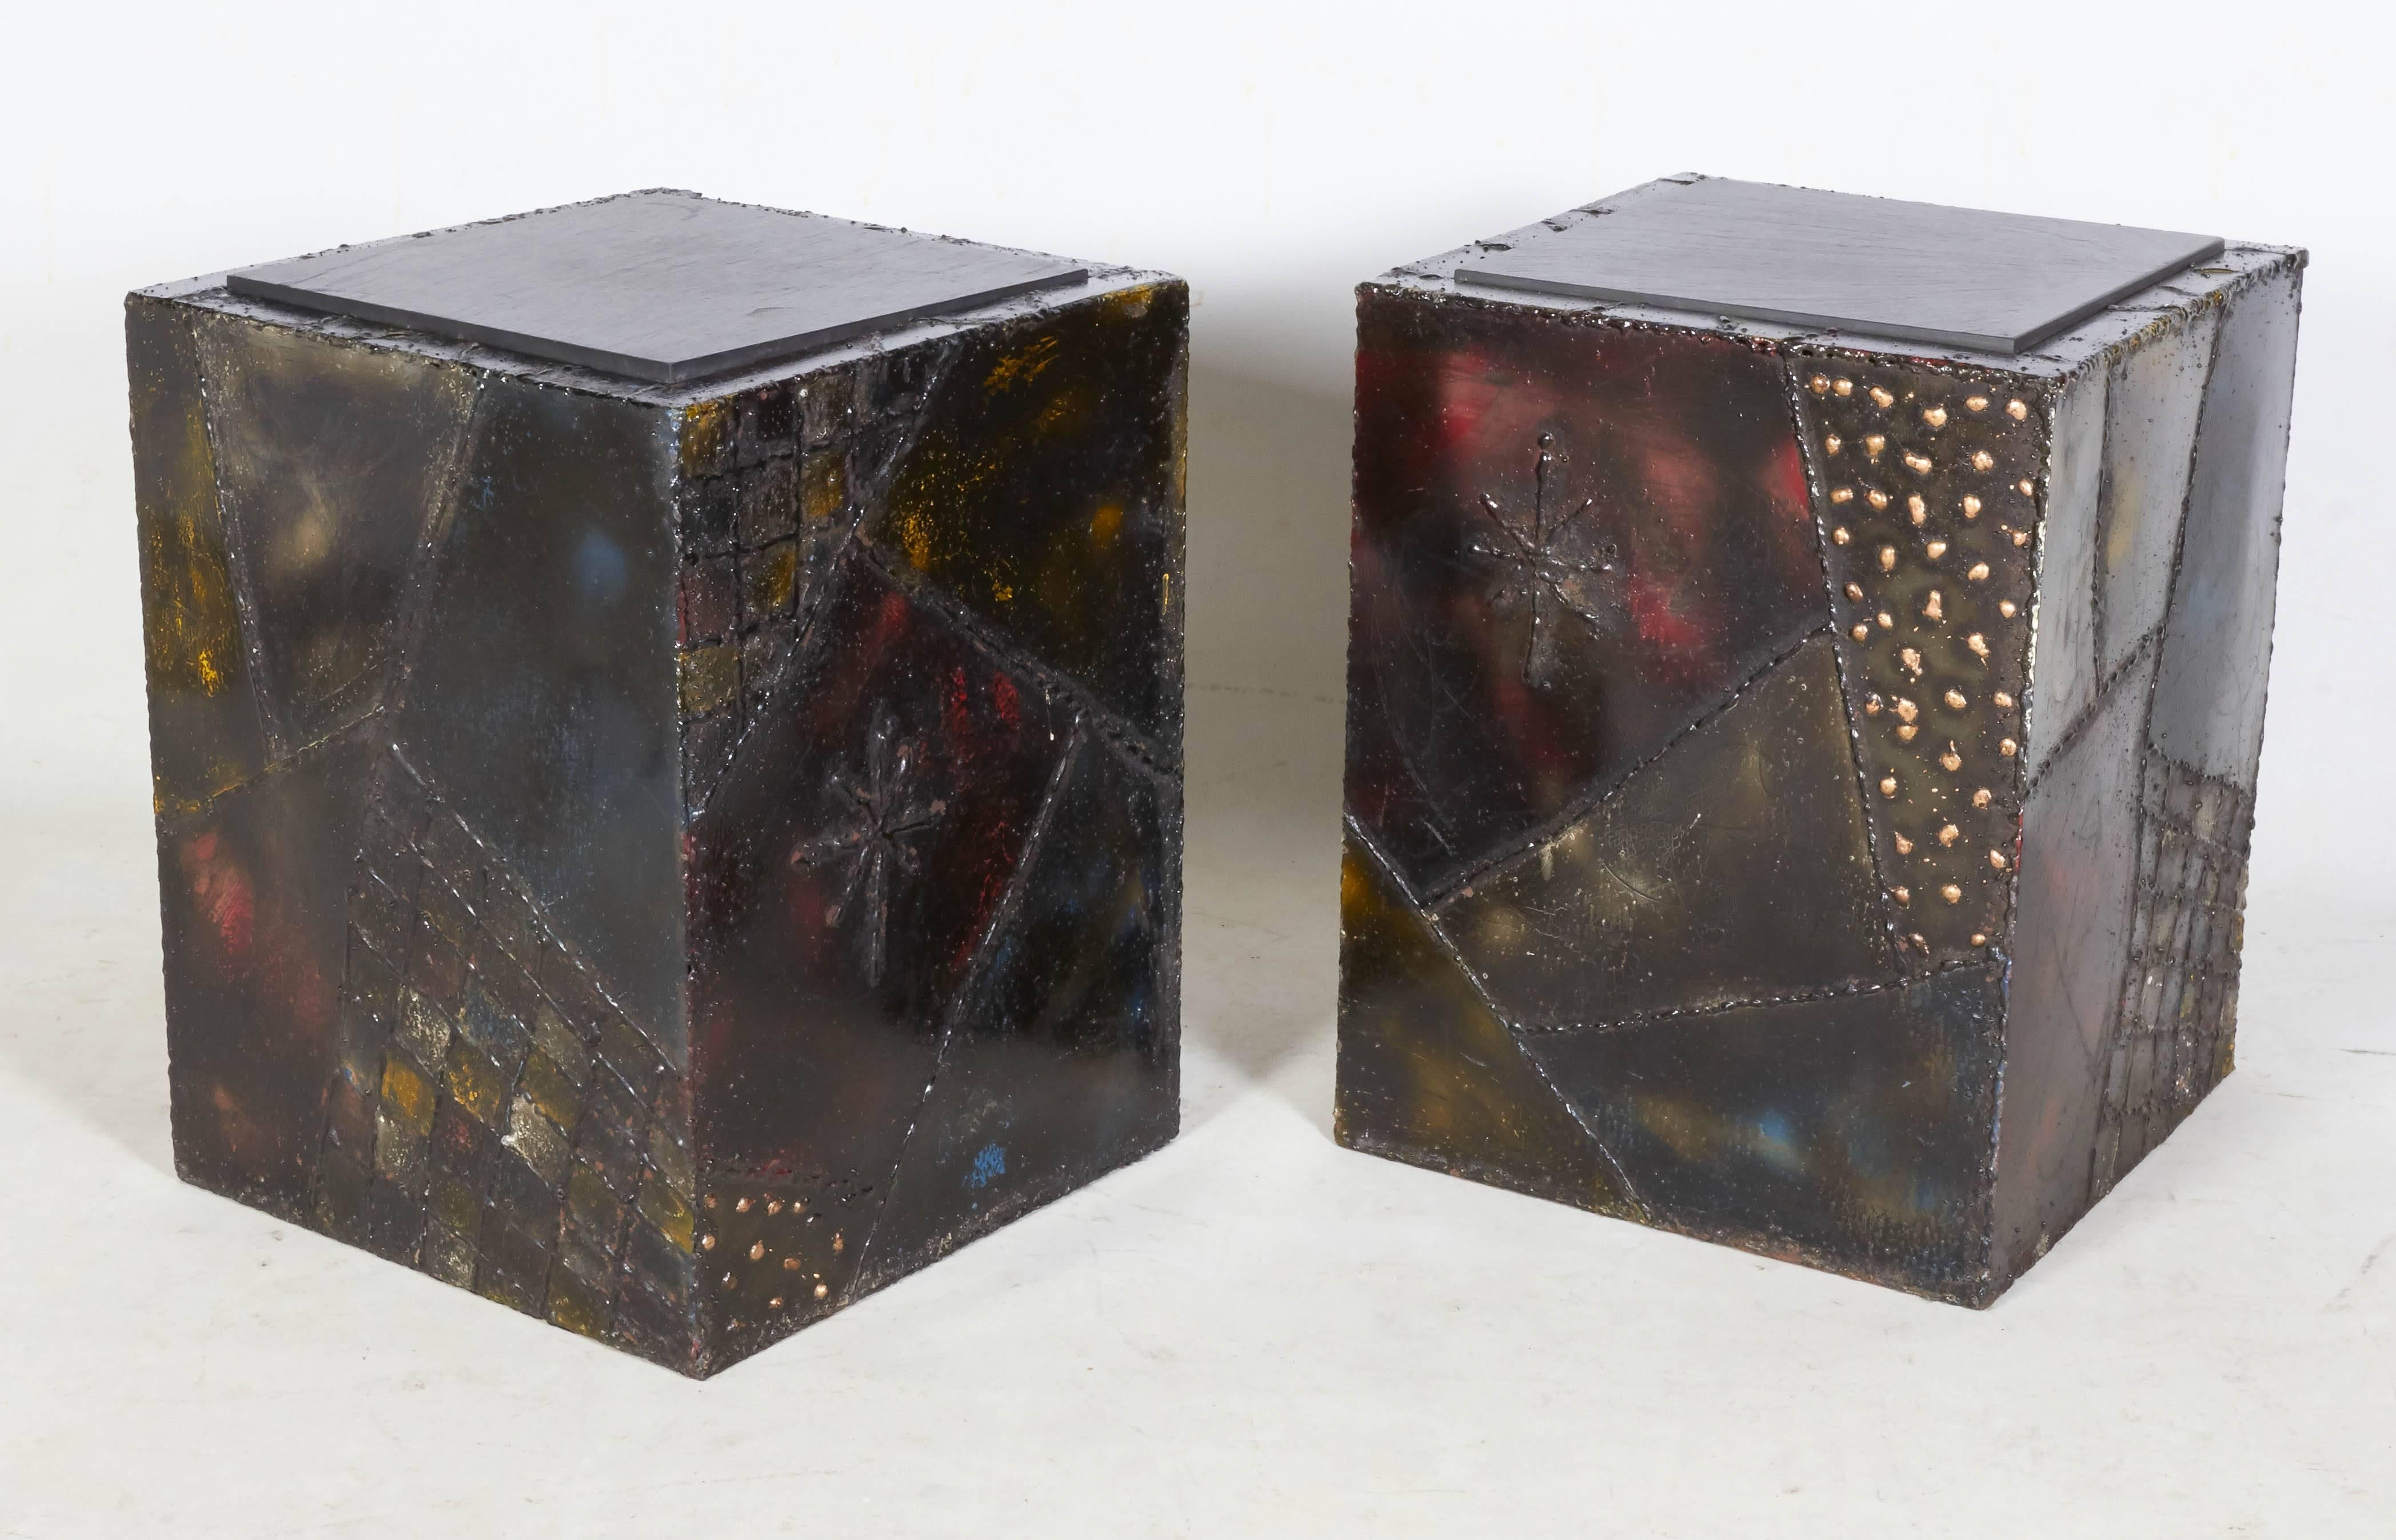 A wonderful pair of Paul Evans cube end or occasional tables with inset slate tops. The tables feature Evans trademark welding techniques along a rich, colorful steel surface. Braised brass details in the playful form of swirls, pinwheels, and